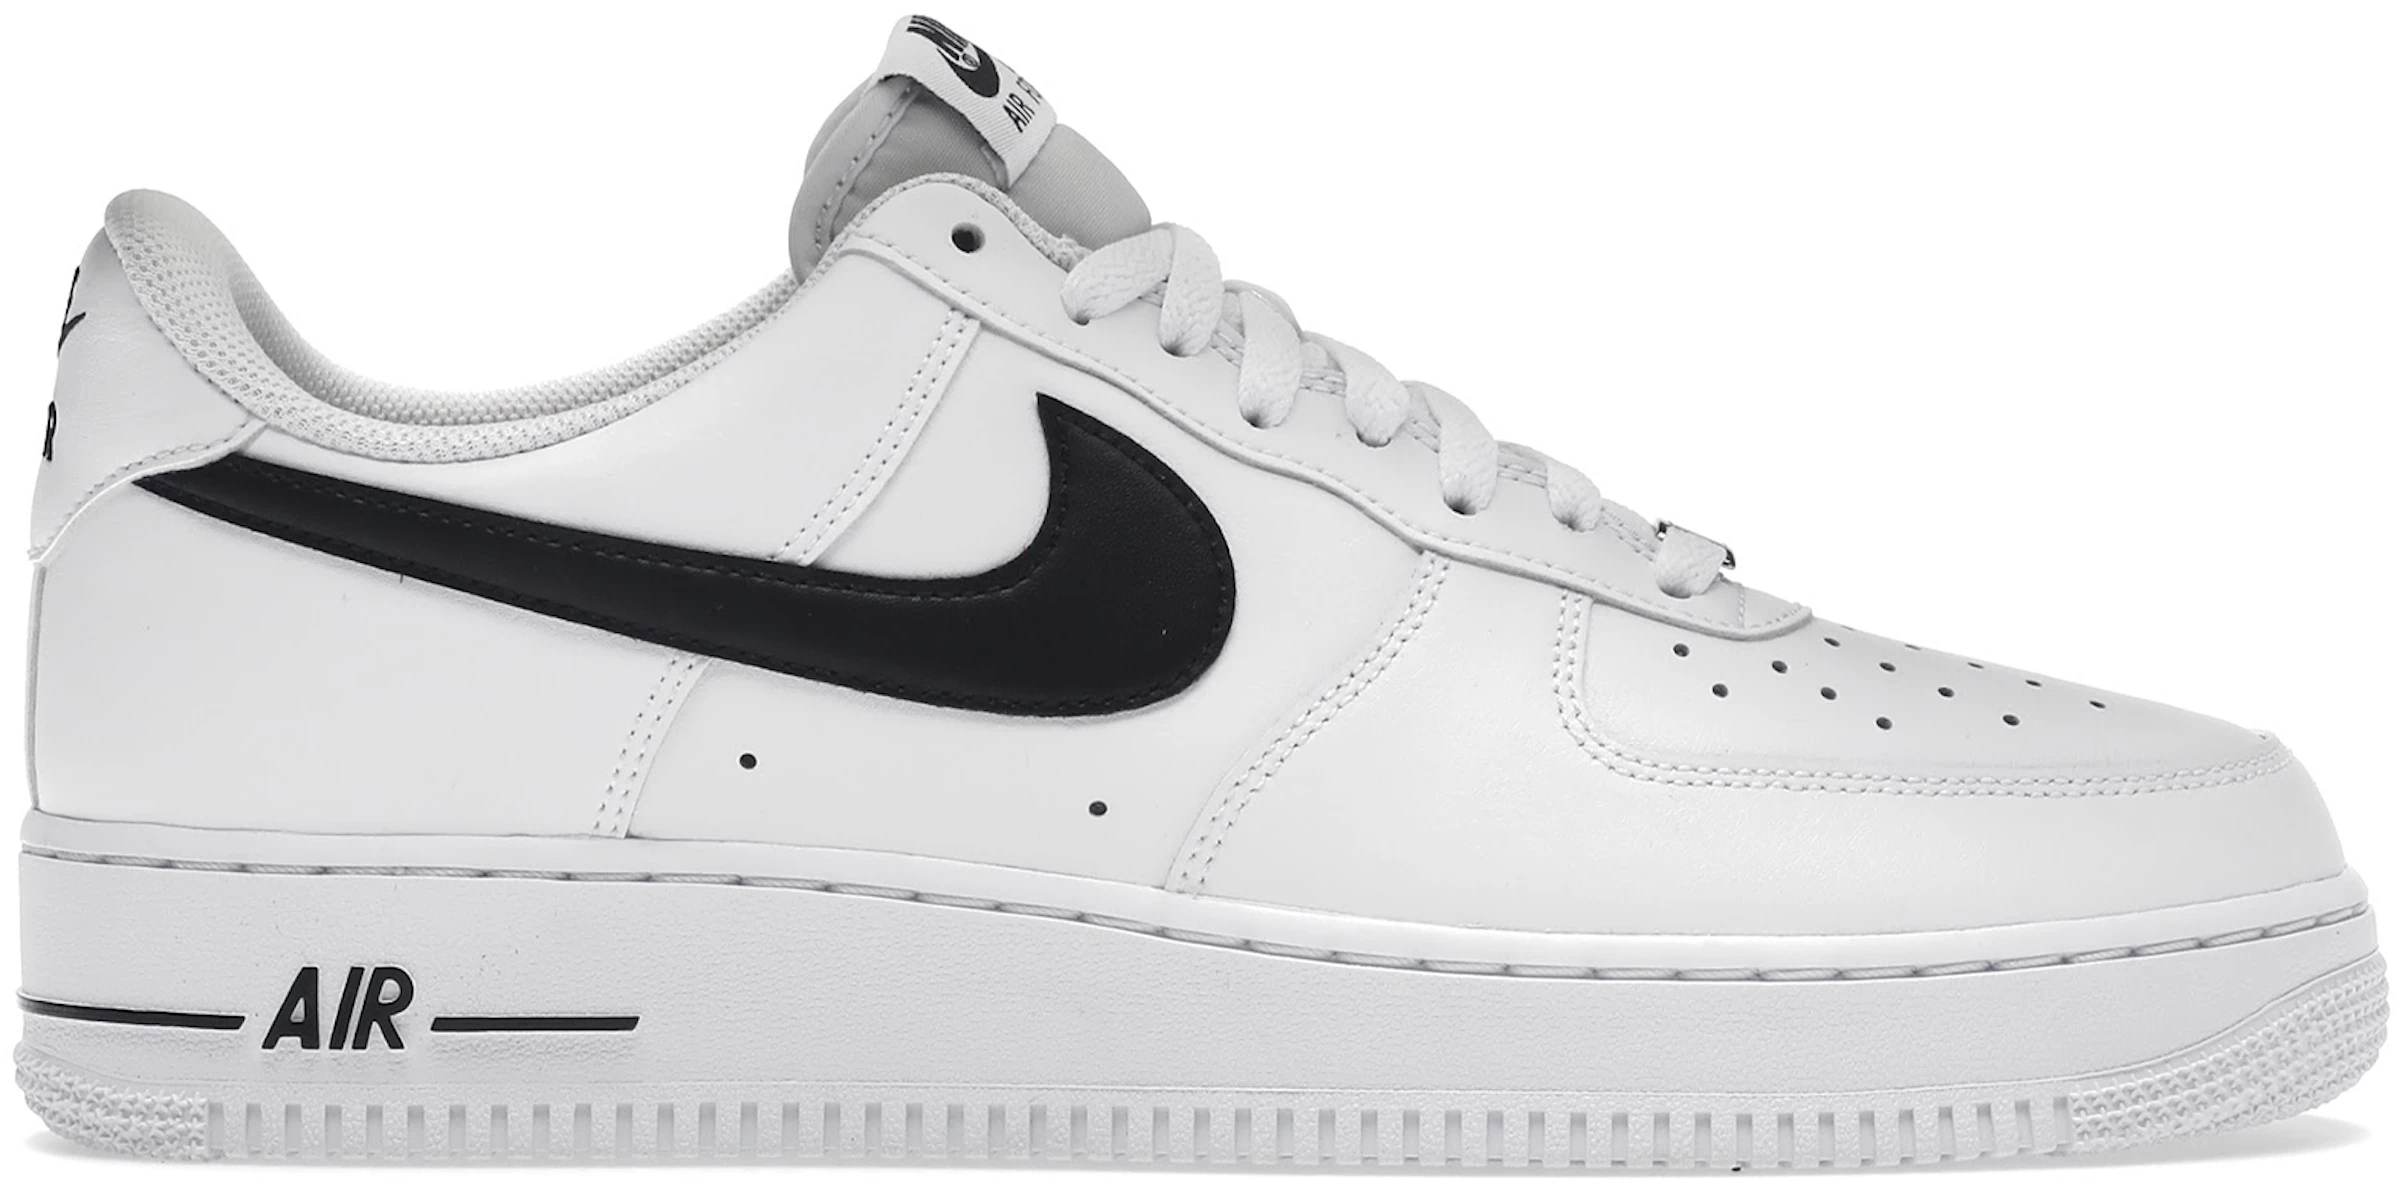 taller rival Barry Nike Air Force 1 Low White Black (2020) - CJ0952-100 - ES